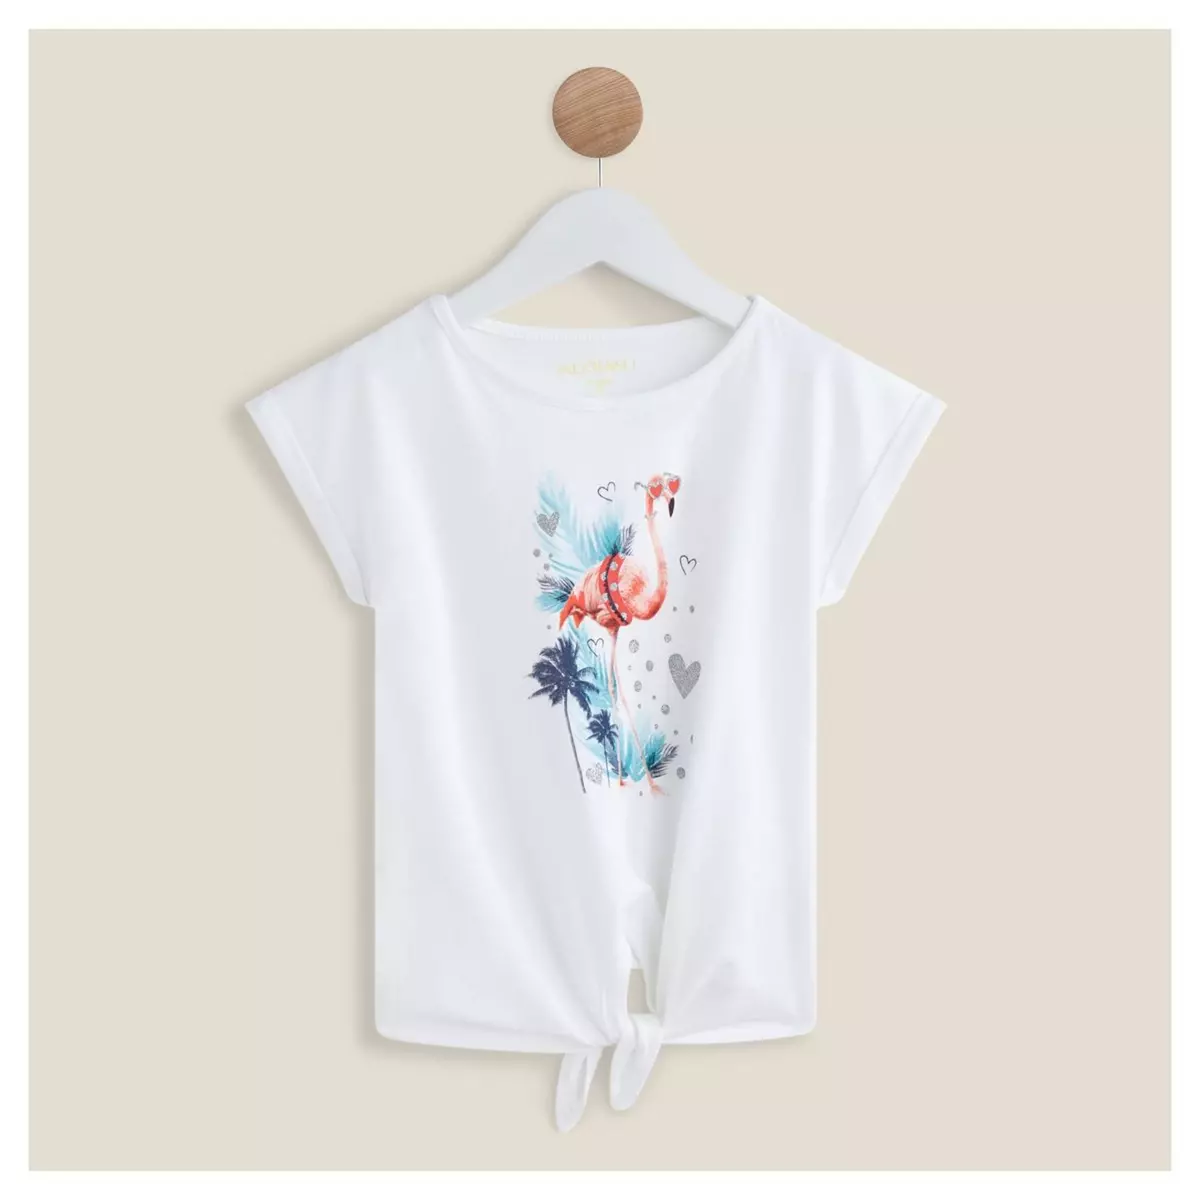 IN EXTENSO T-shirt manches courtes flamant rose avec noeud fille